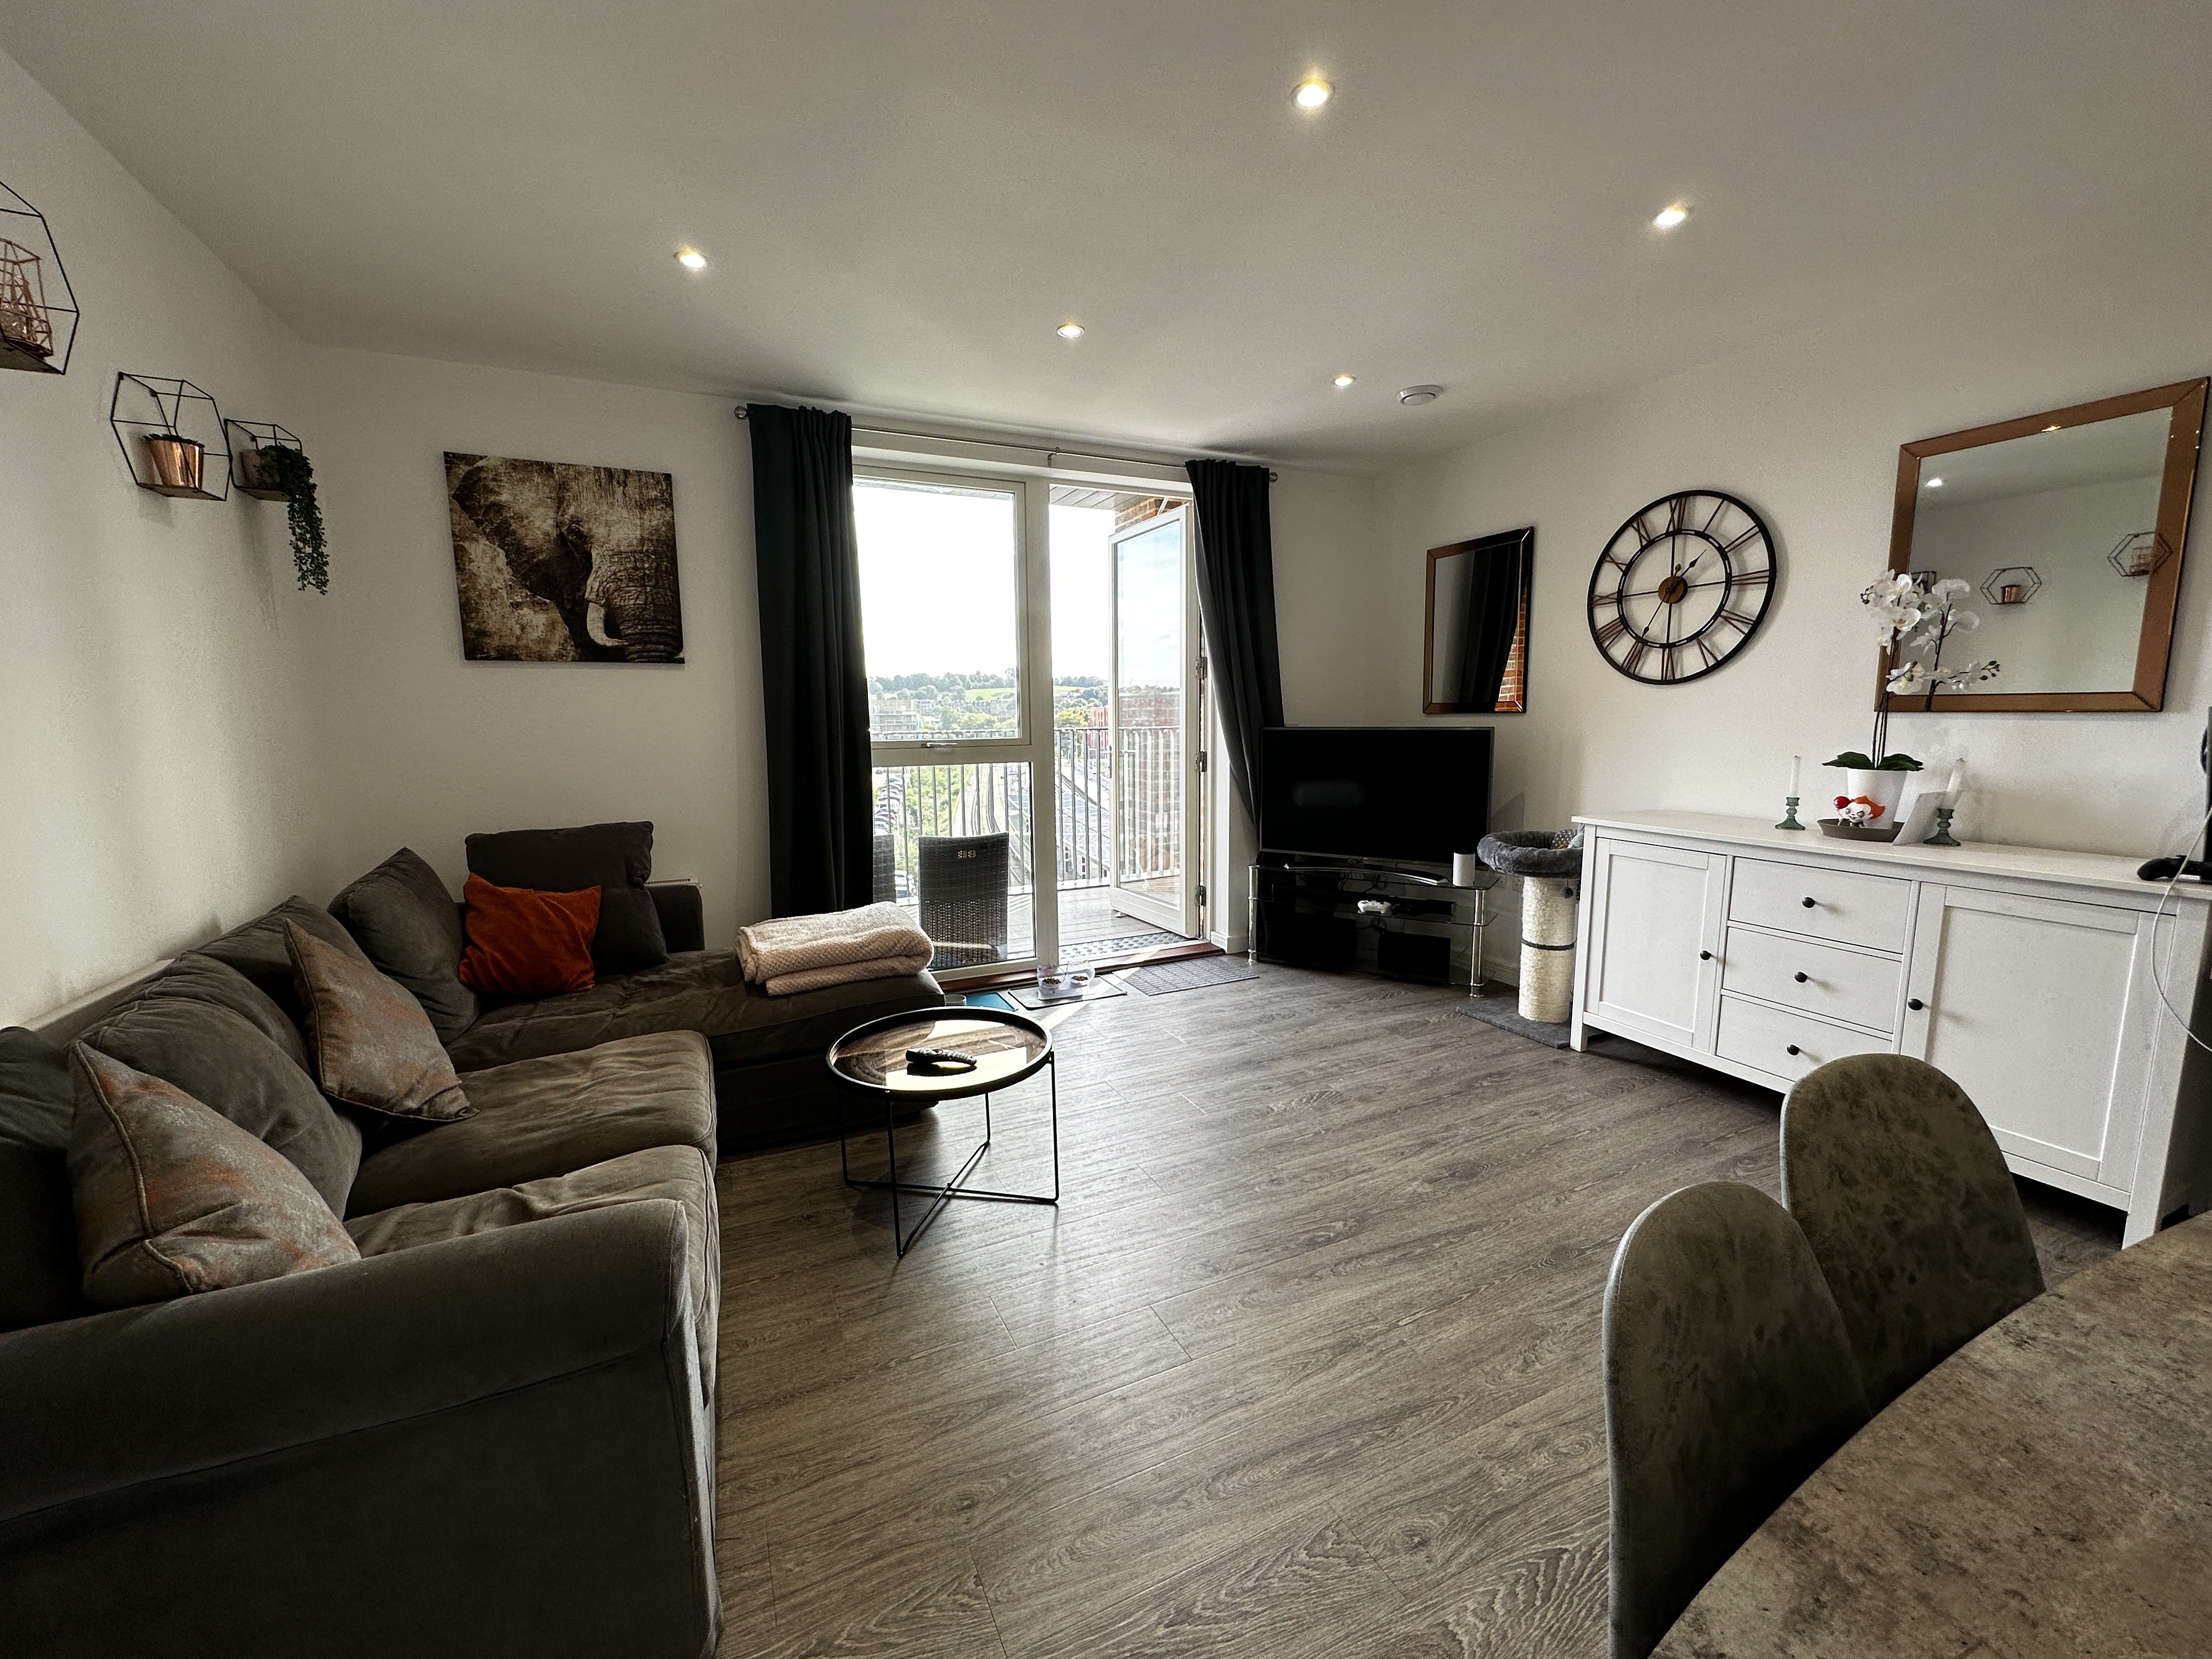 <p>Imagine sitting down on your balcony and as your backdrop you see Rochester Castle and Cathedral, this 4th floor partly furnished apartment has just that. In addition to the great views this apartment is very well sized, the apartment is in Rochester Riverside which is a central Rochester location with the train station and the high street just a few minute walk.</p><p><br/><br/></p><p>The apartment was built in 2019 and features 2 very good sized bedrooms, with the main bedroom has built in wardrobes and en-suite. There is plenty of storage within the apartment. The living area consists of the kitchen and the lounge which includes all the integrated appliances that you would require.</p><p><br/><br/></p><p>There aren't many apartments this size available so if you are interested we would recommend getting in touch to book a viewing as soon as you can.</p><p><br/><br/></p><p>Property details:</p><p>EPC - B</p><p>Council Tax - C - £1,696 per year</p><p>Tenancy length - Either 6 or 12 months</p><p><br/><br/></p><p>Landlord details:</p><p>Unfortunately no pets</p><p>Holding deposit £334.61</p><p>Deposit £1,673.07</p><p>Available early November</p>